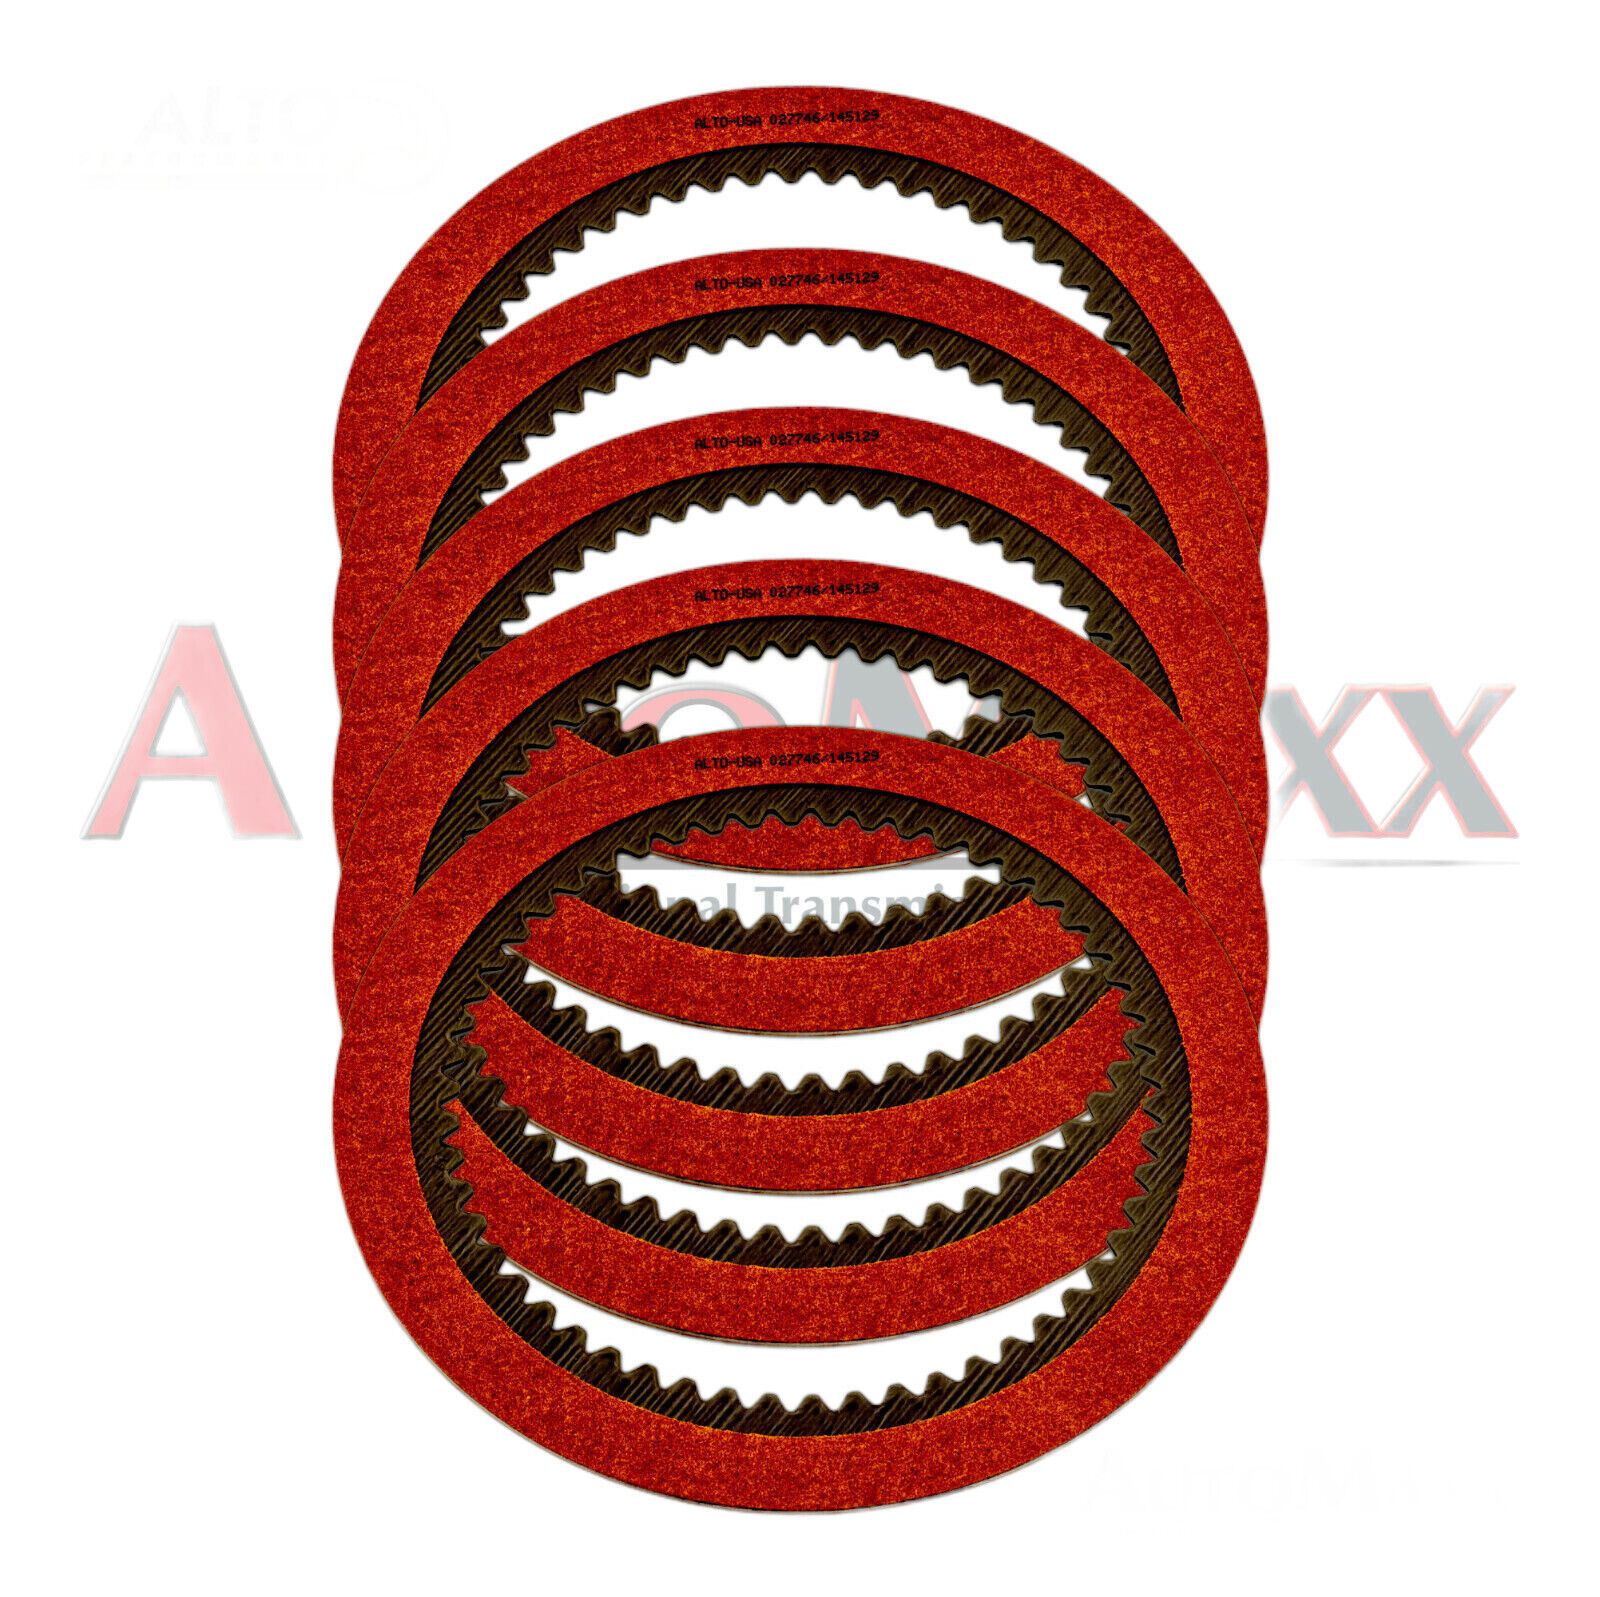 Alto A518 618 46RE 47RE Red Eagle Overdrive Friction Clutch Set 5 pcs Heavy Duty